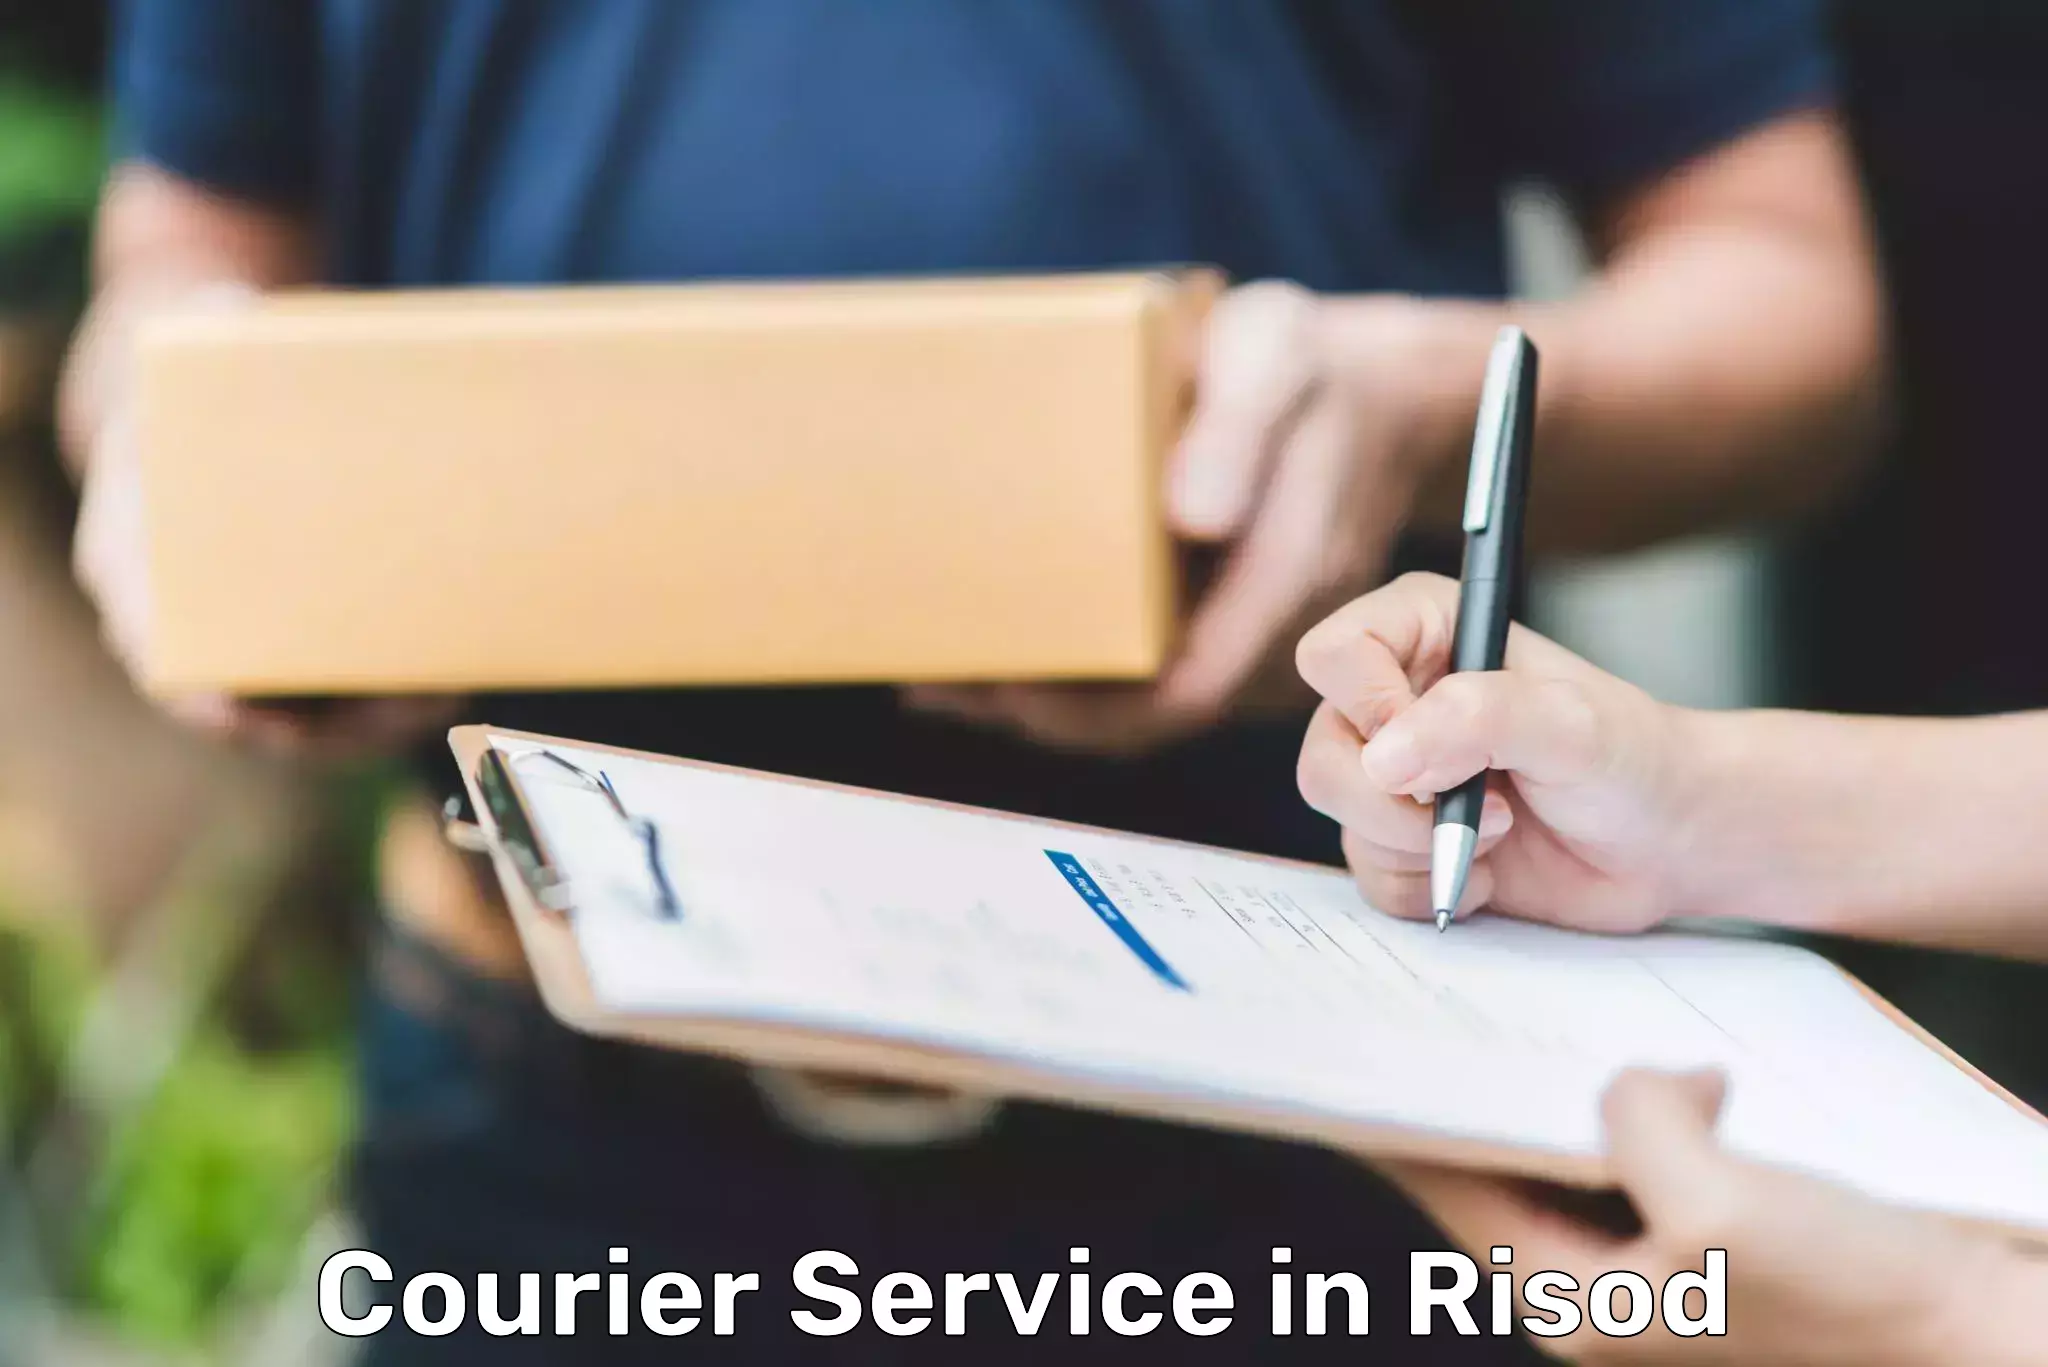 Enhanced delivery experience in Risod